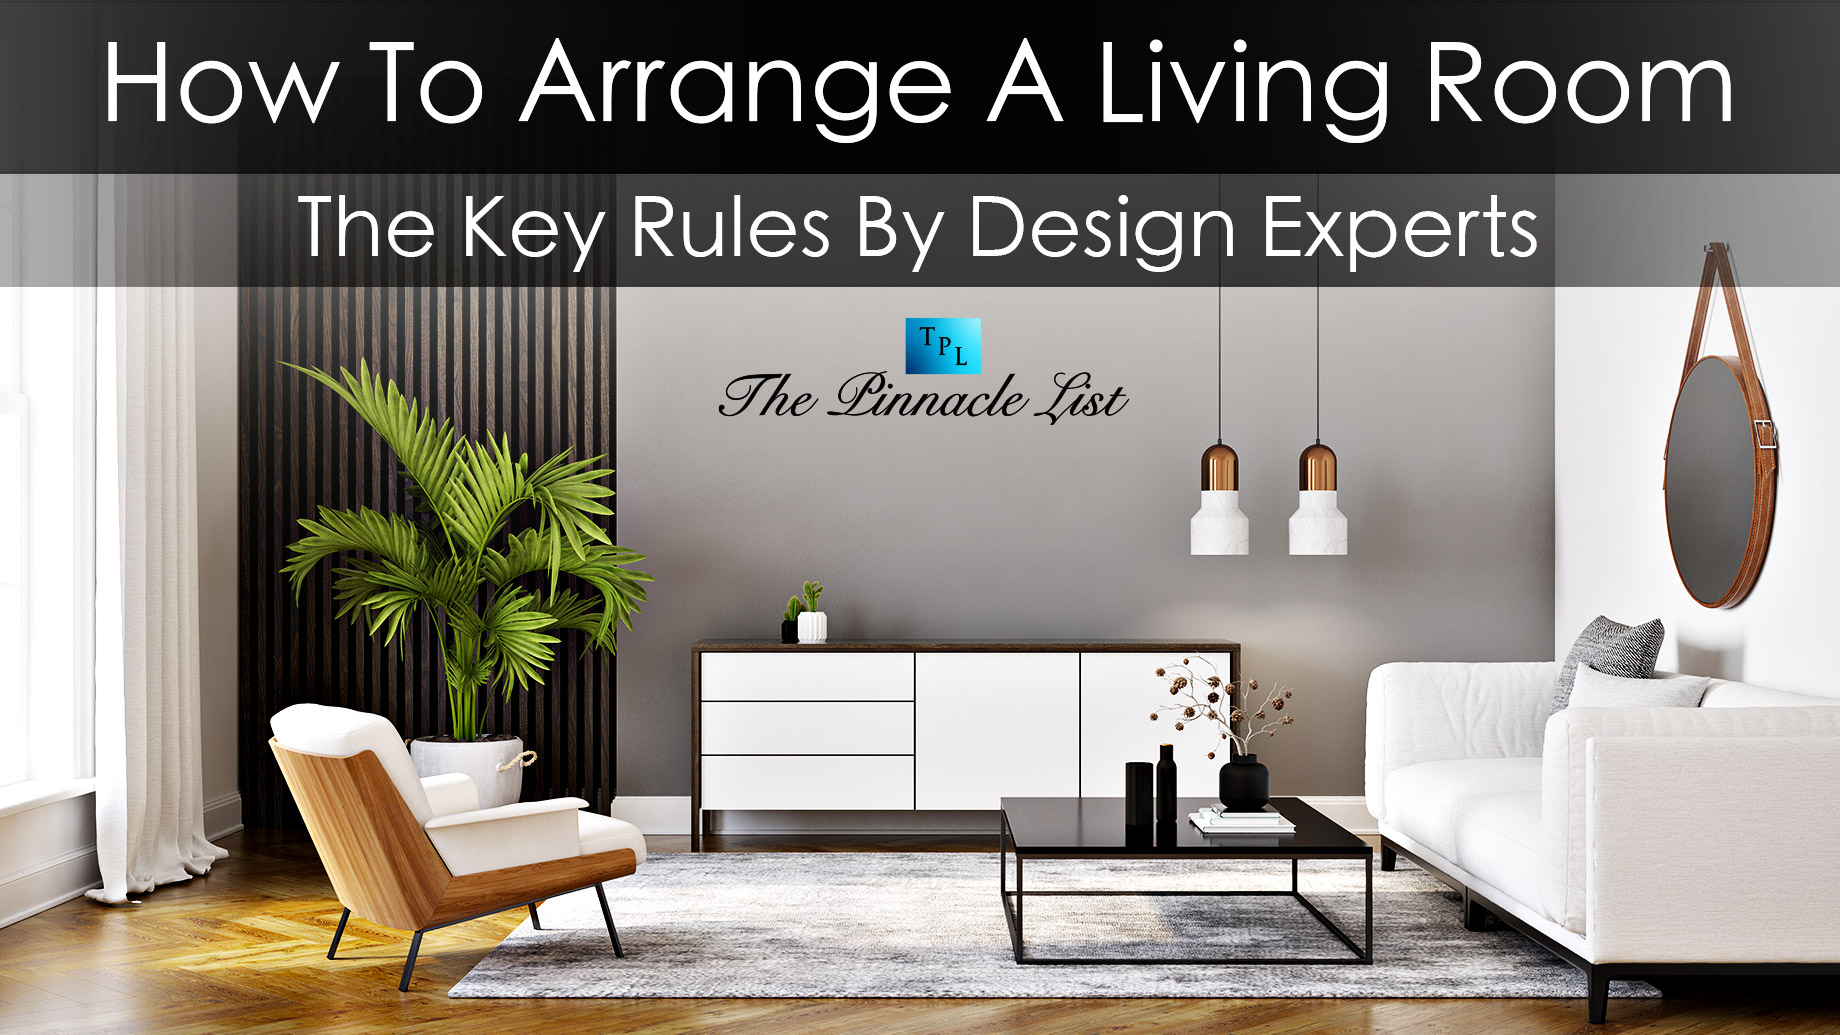 How to Arrange a Living Room - The Key Rules by Design Experts